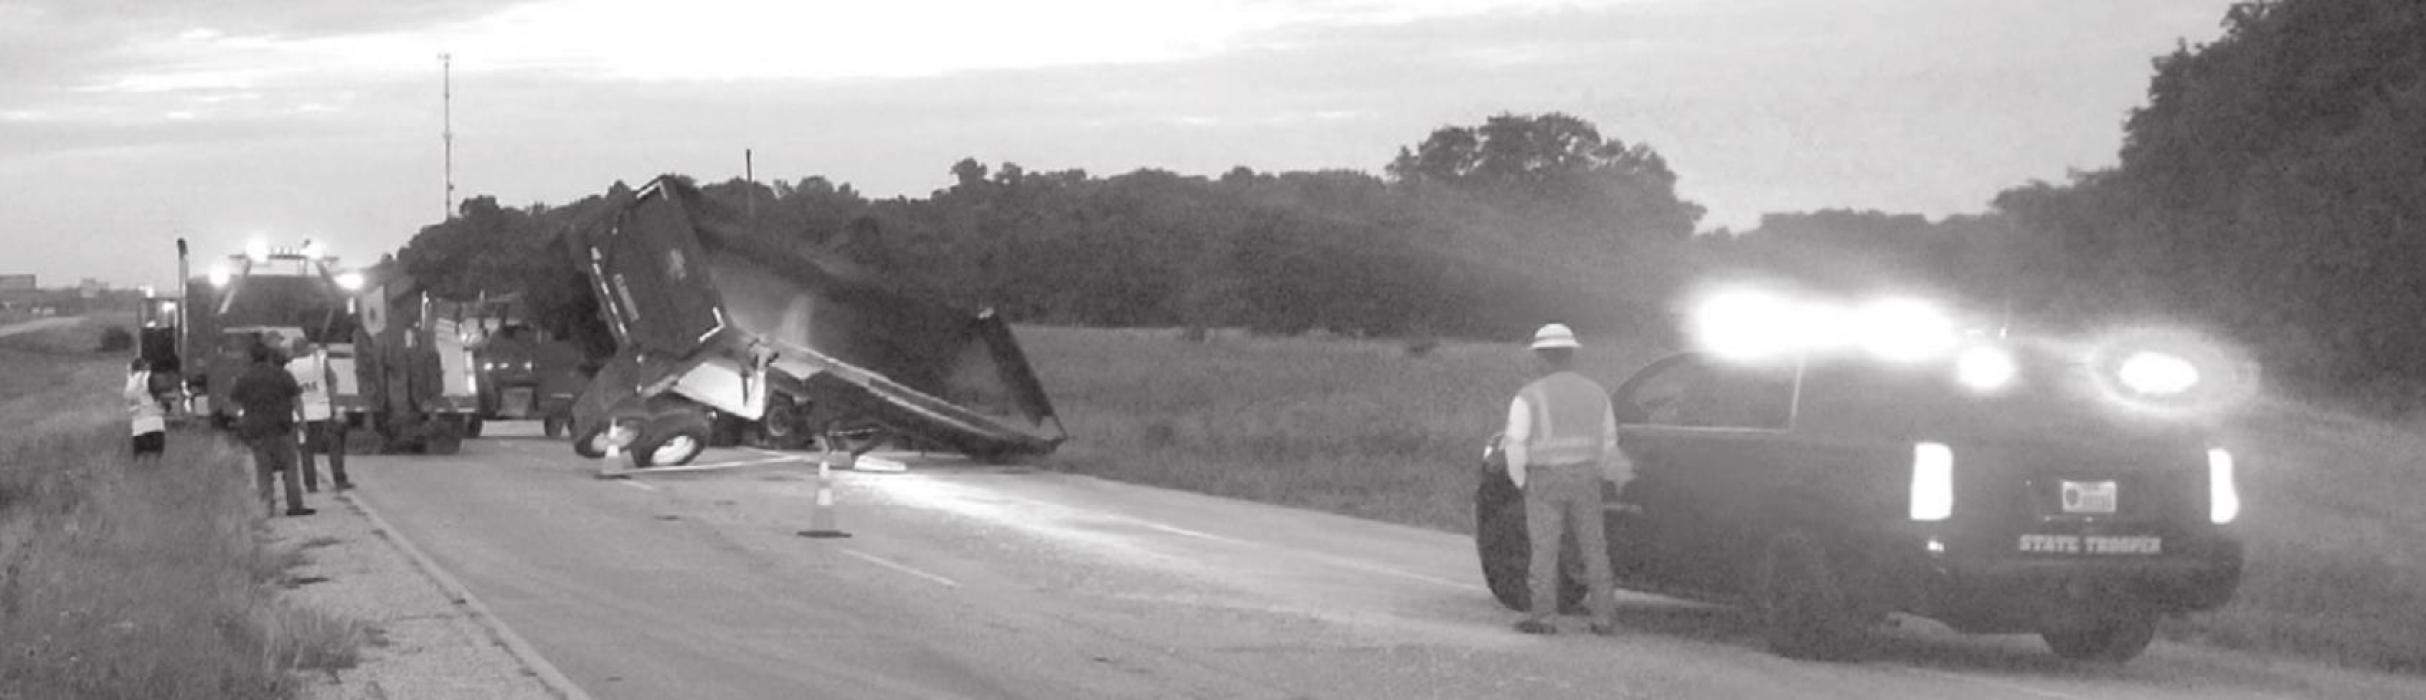 The Ellinger VFD was dispatched to a vehicle roll over in the east bound lane of State Hwy71 between FM 955 and Krenek Road. The fireman found an eighteen wheeler on its side. It had been loaded with sand and overturned as it swerved to miss a white tail deer.